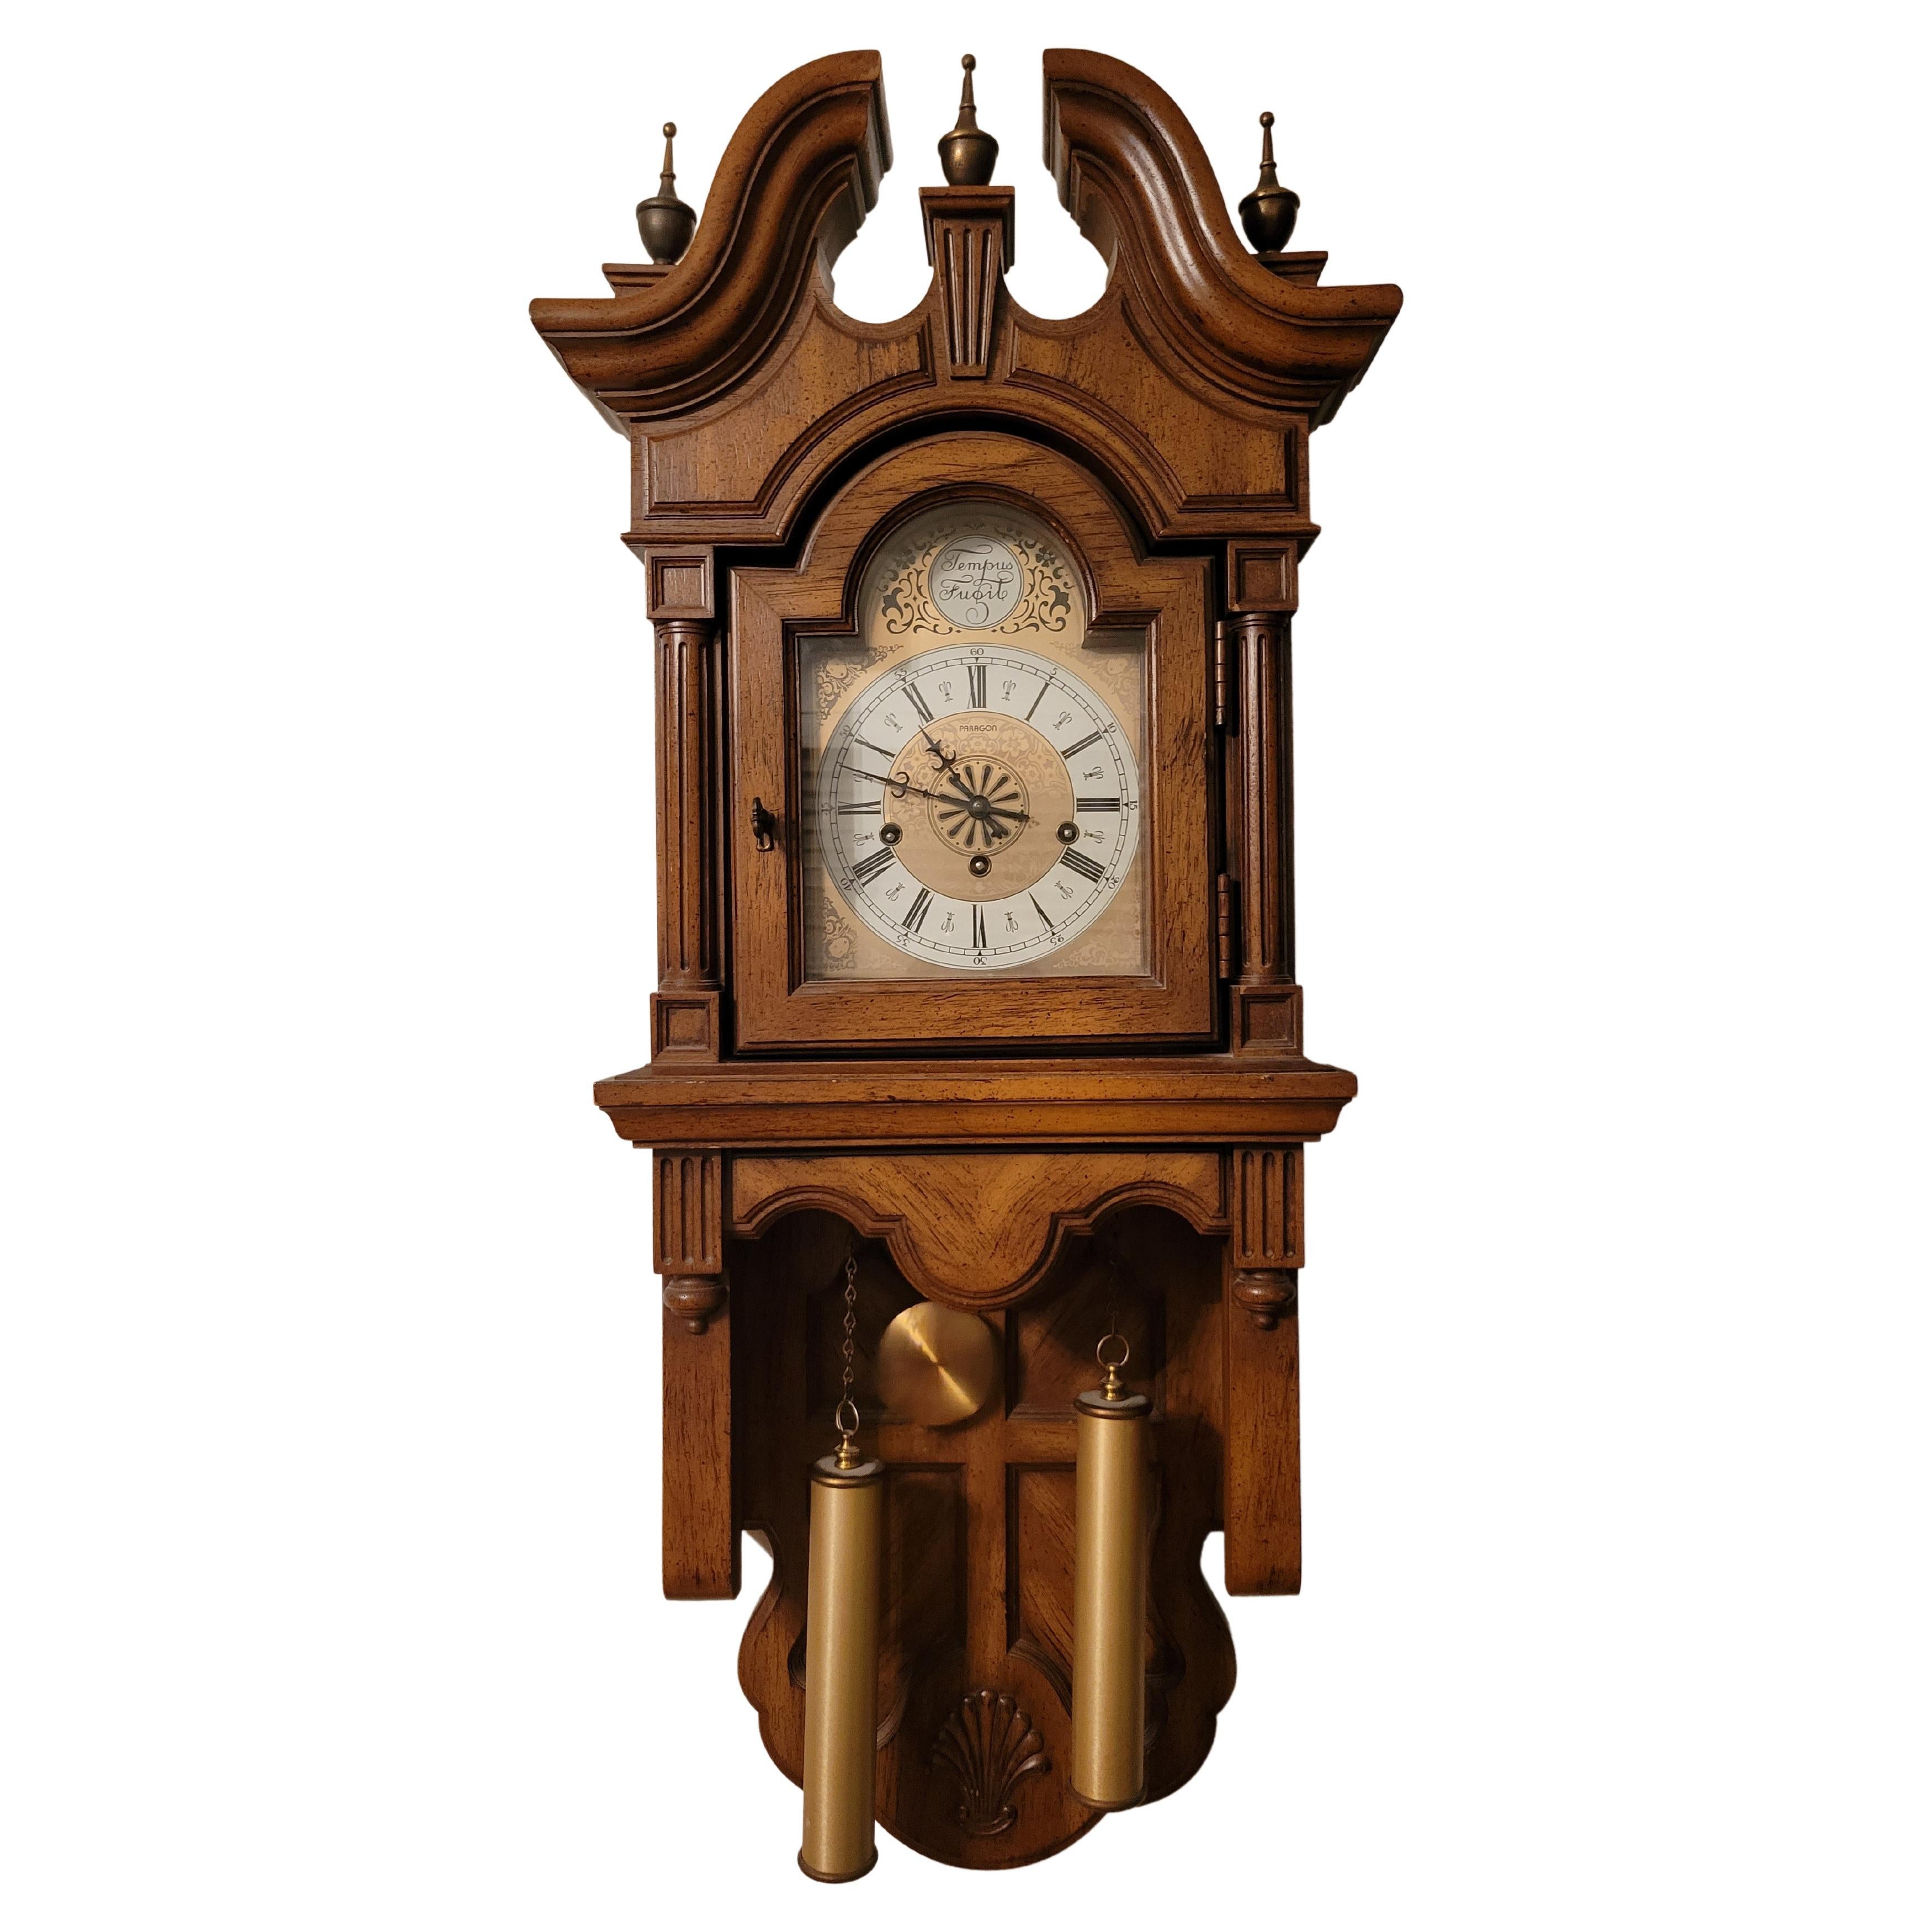 Paragon Vintage Wall Clock with Westminster Chime